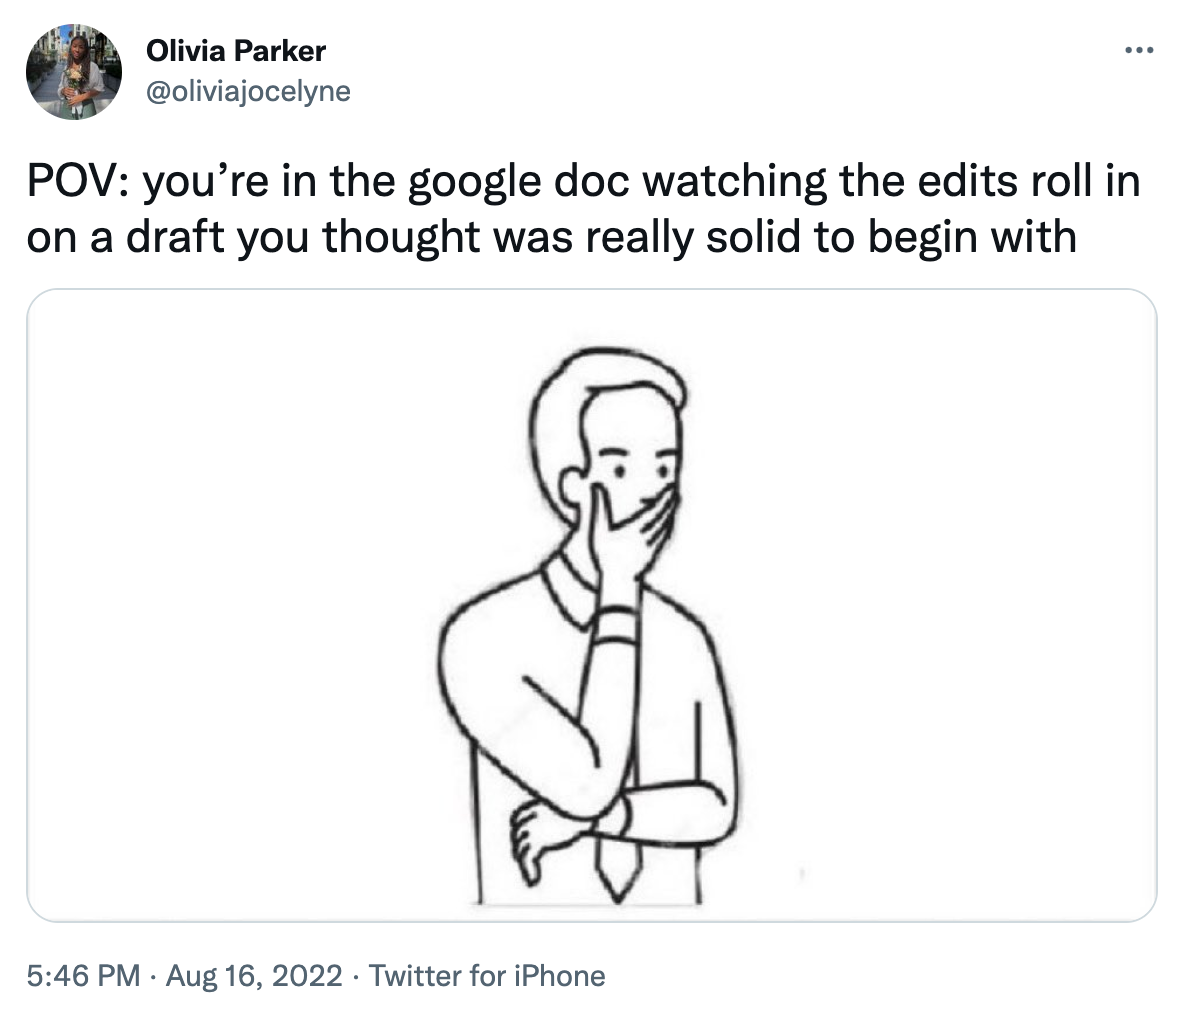 A tweet with an image of a man covering his mouth in concern, reading "POV: you're in the google doc watching the edits roll in on a draft you thought was really solid to begin with."